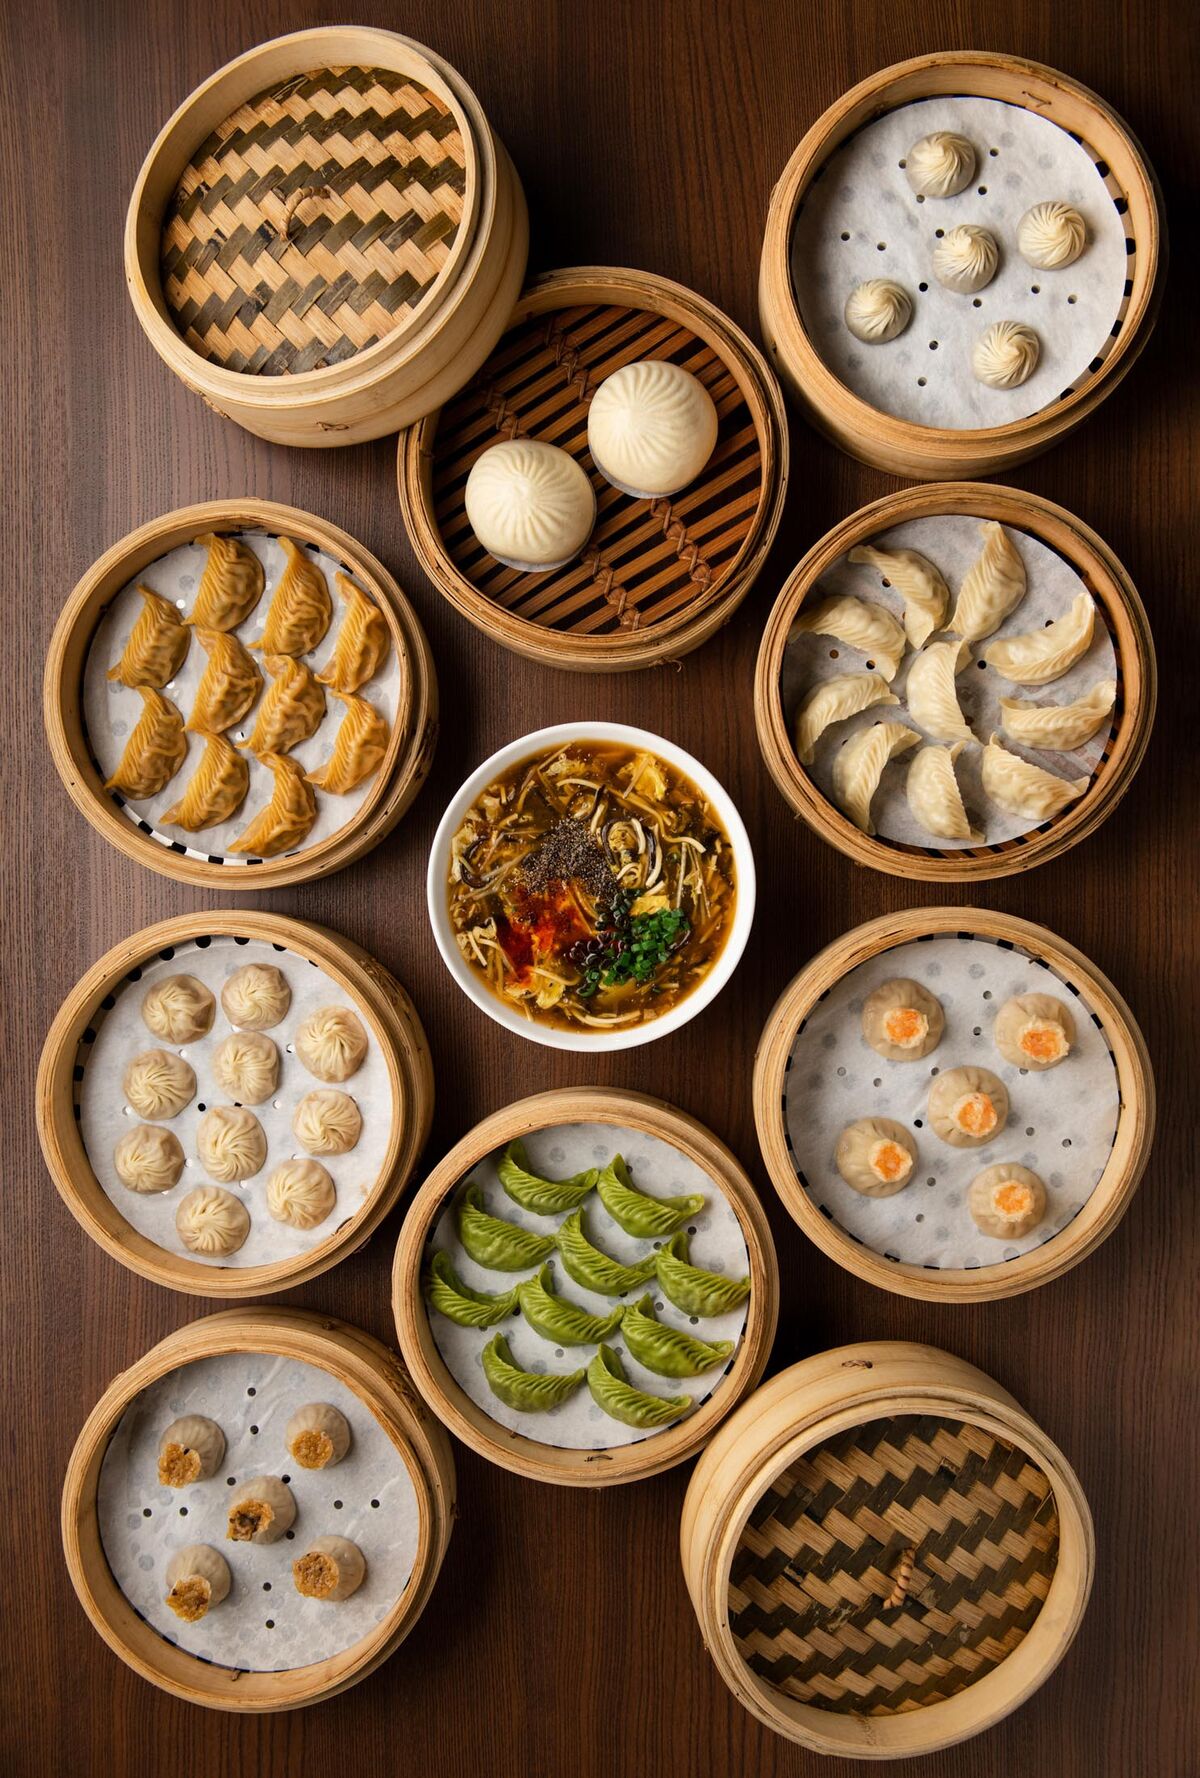 The World’s Most Famous Dumplings Have Arrived in New York